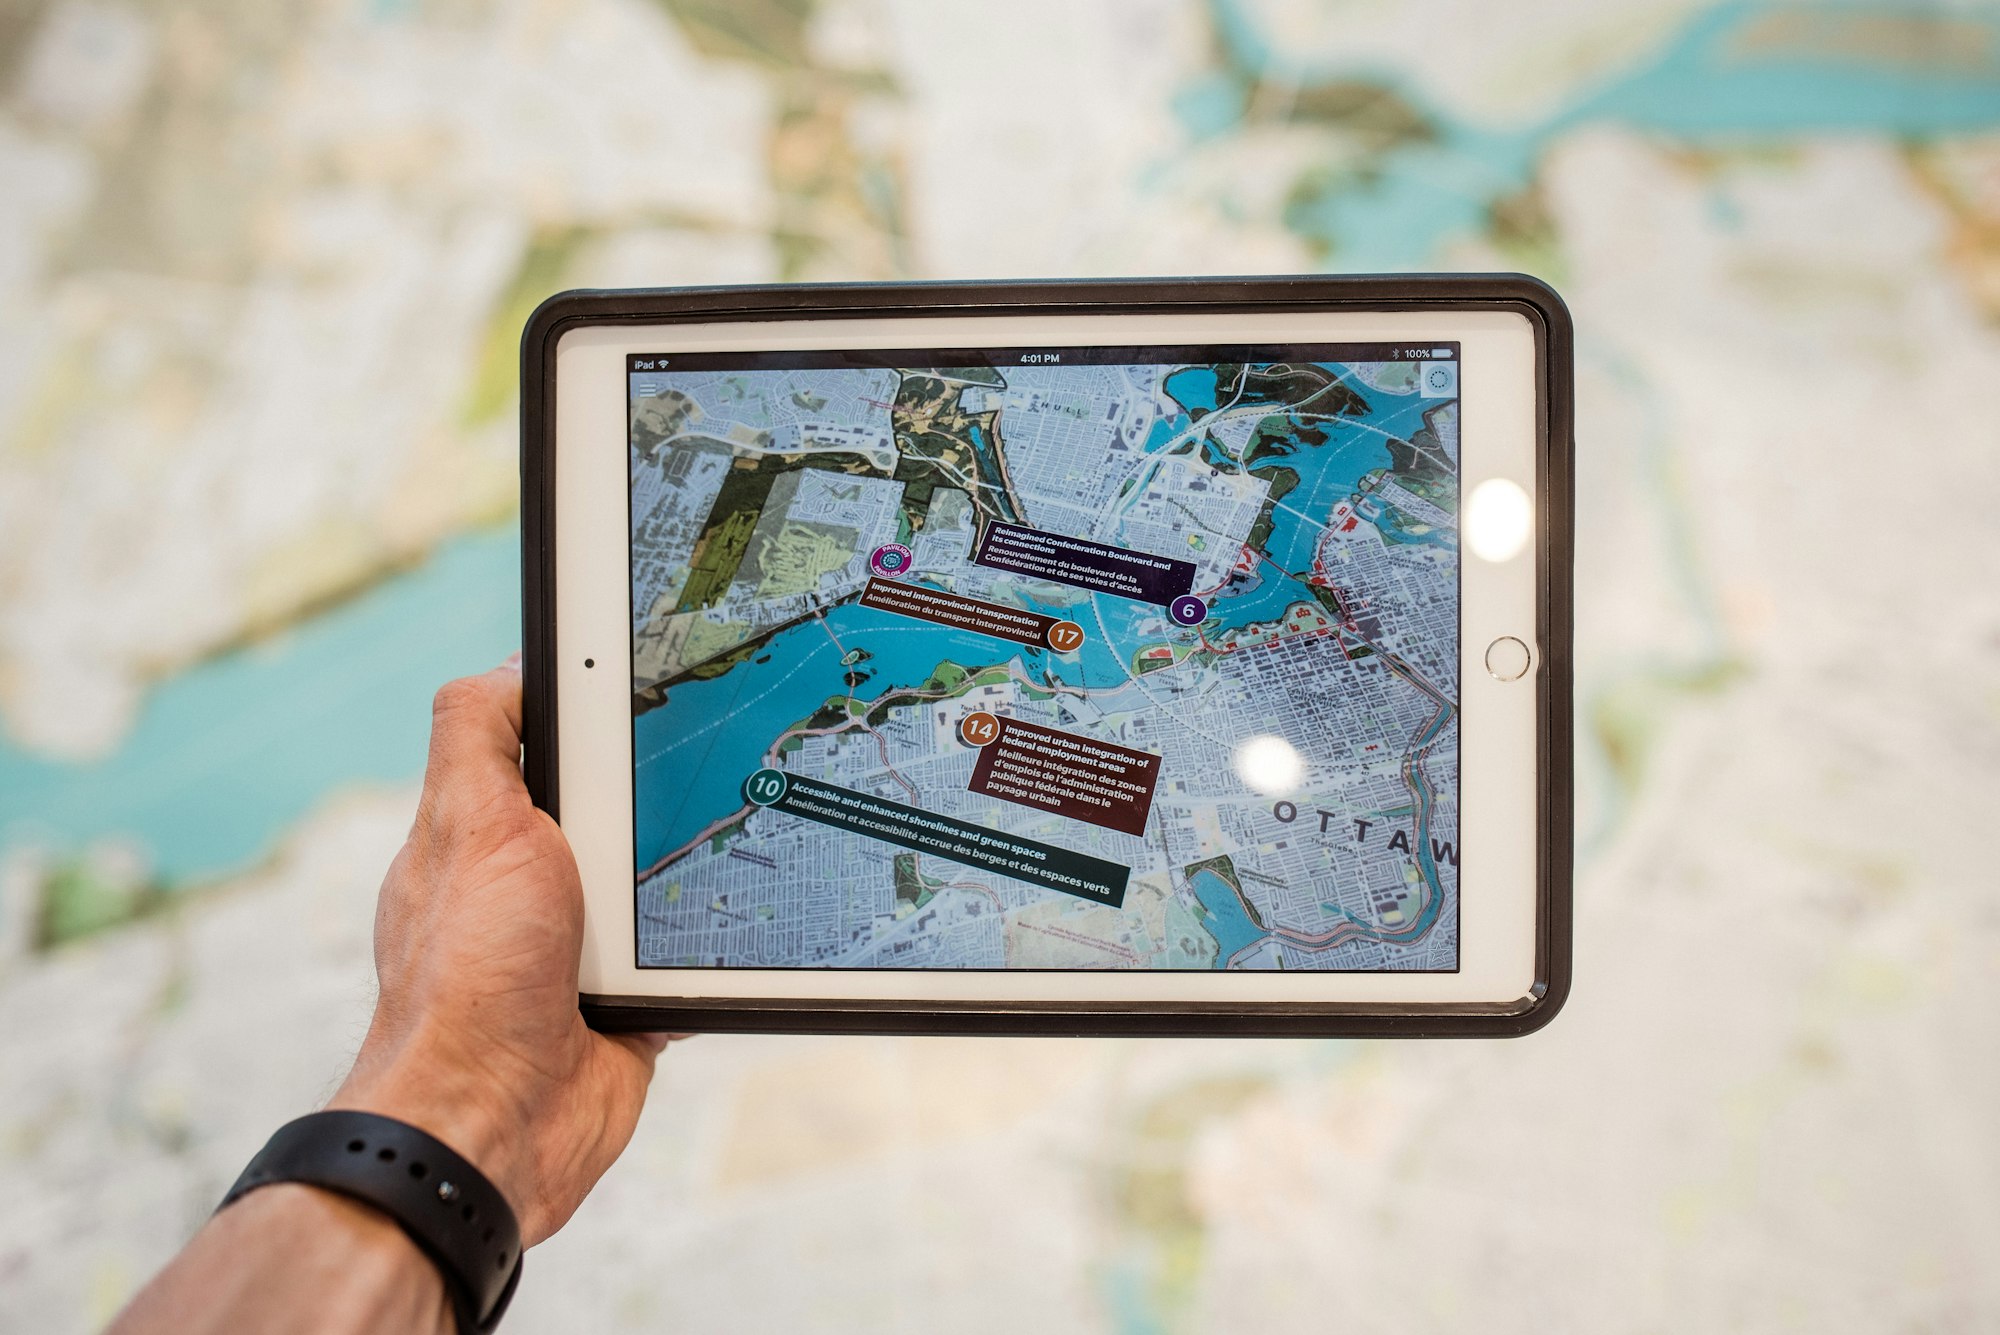 Mapping on a tablet